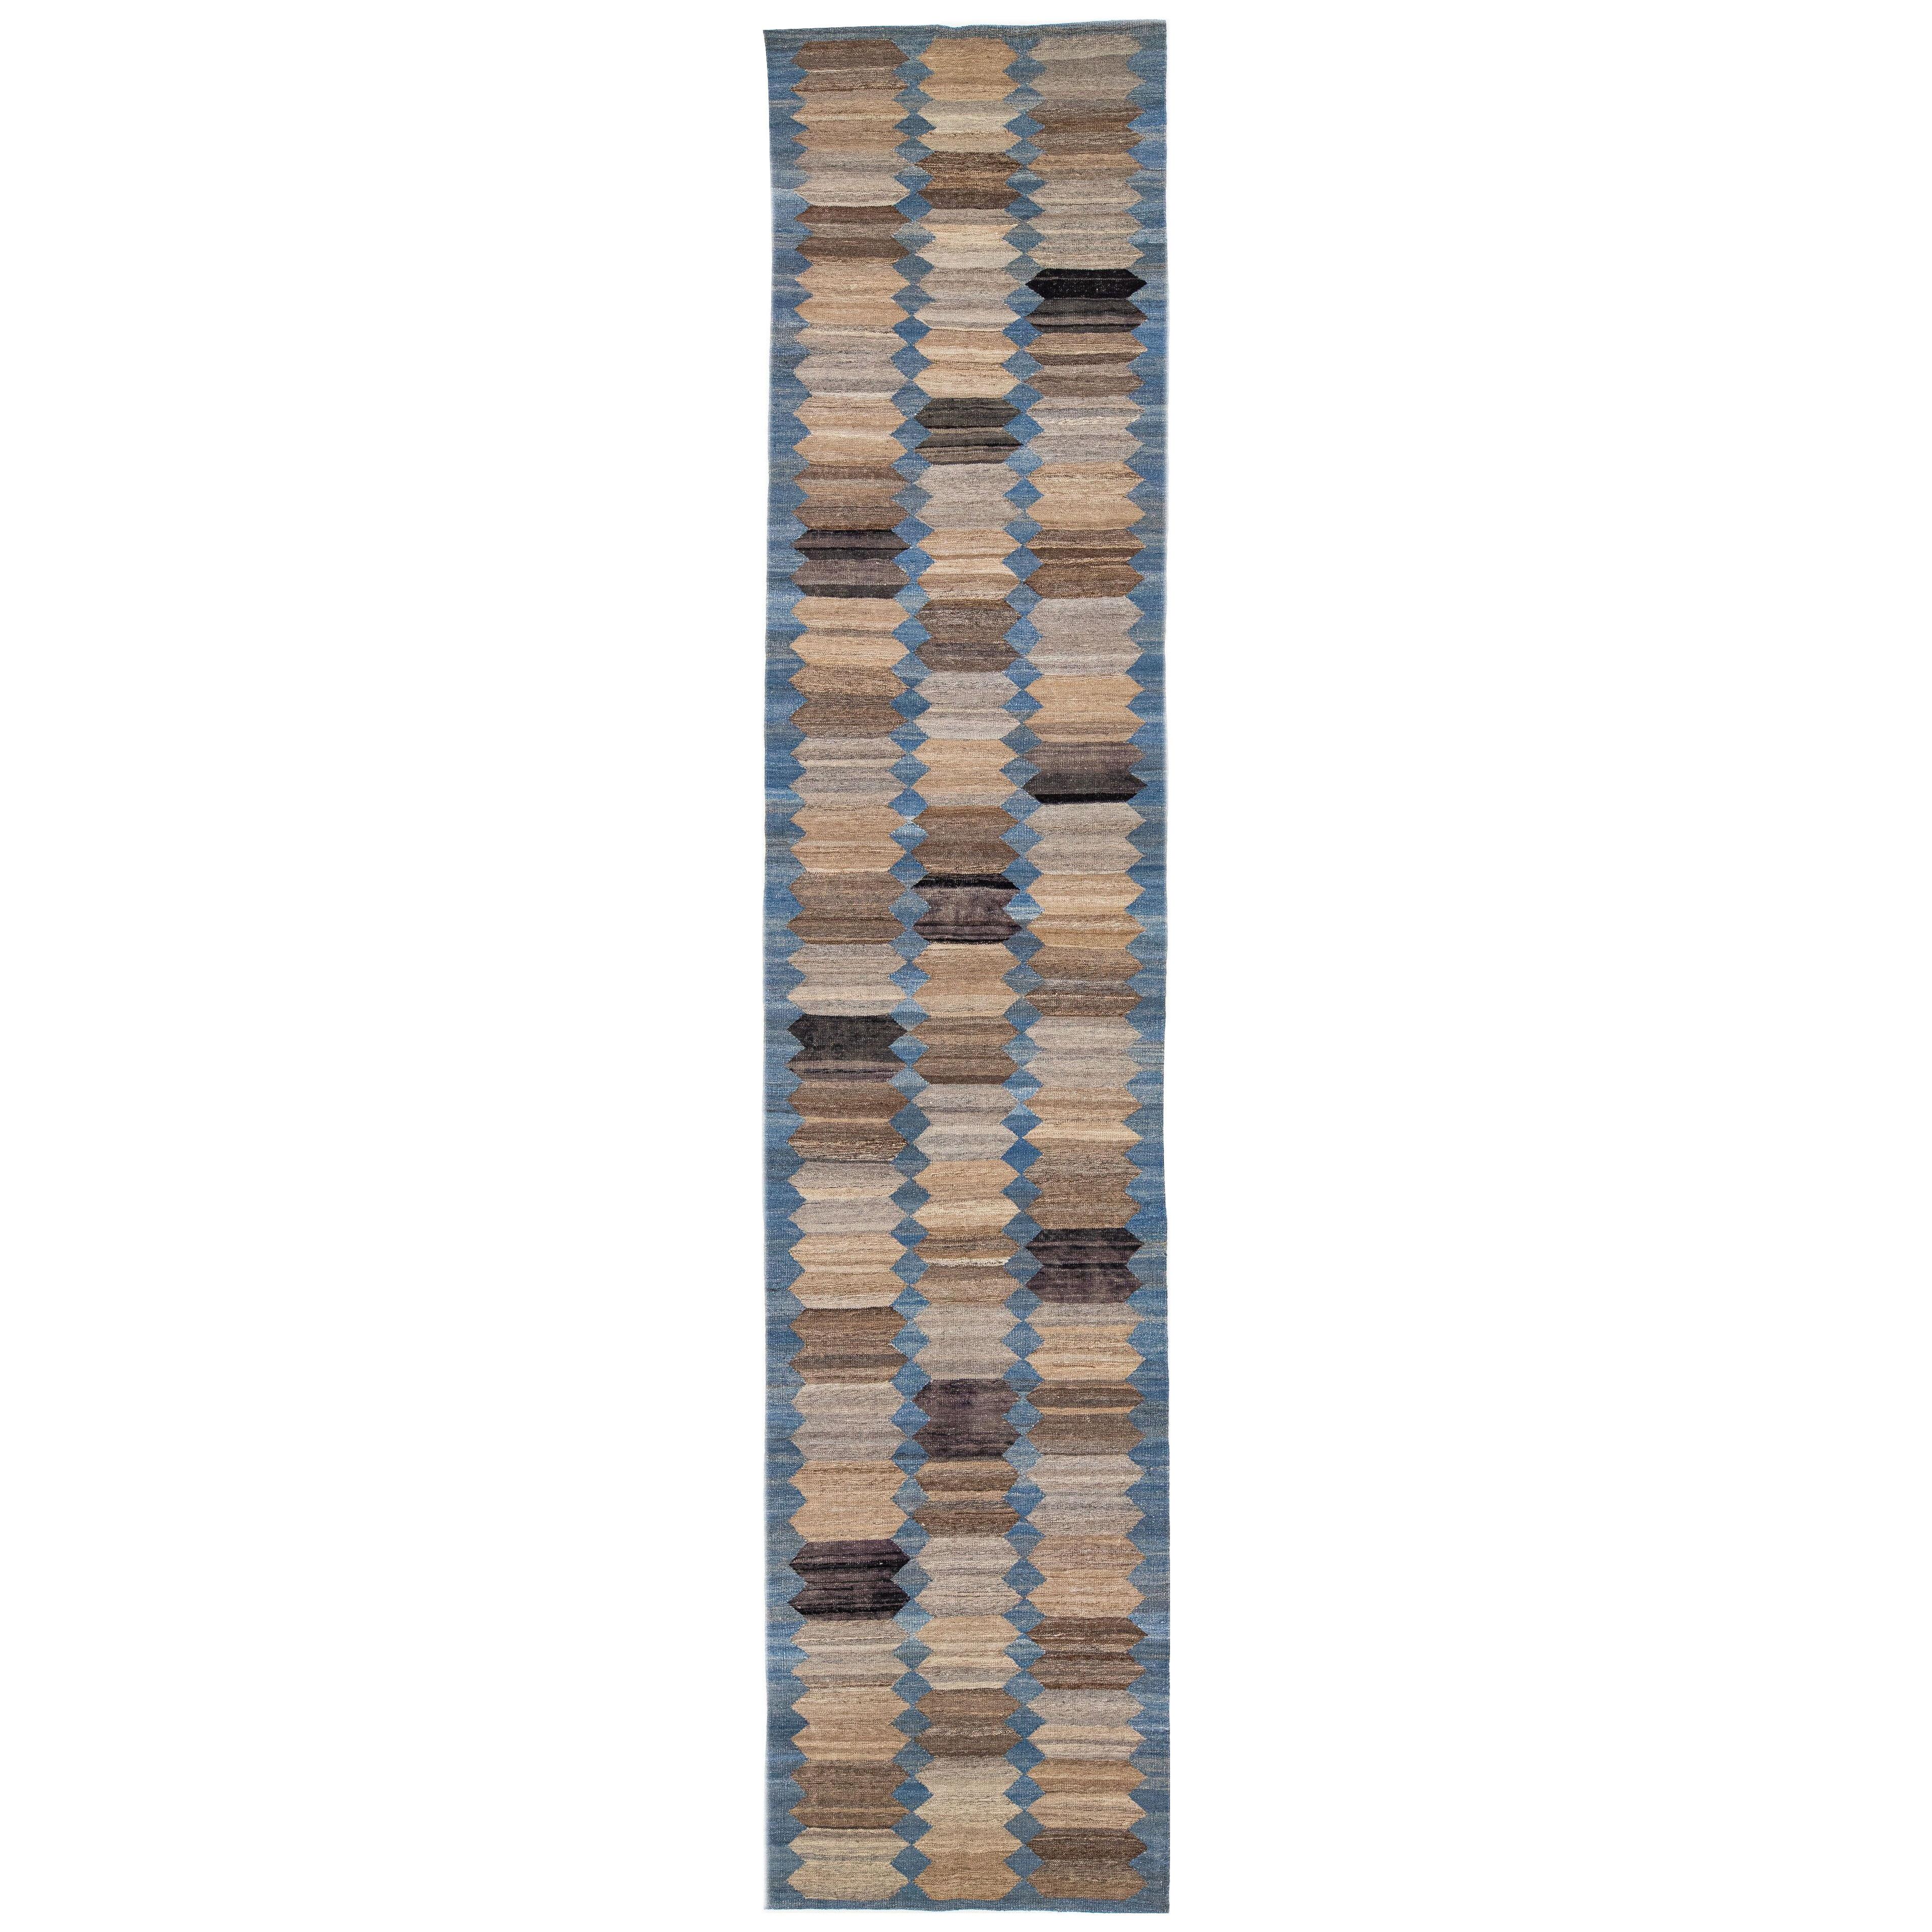 Blue and Brown Flatweave Kilim Wool Runner with a Modern Abstract Design